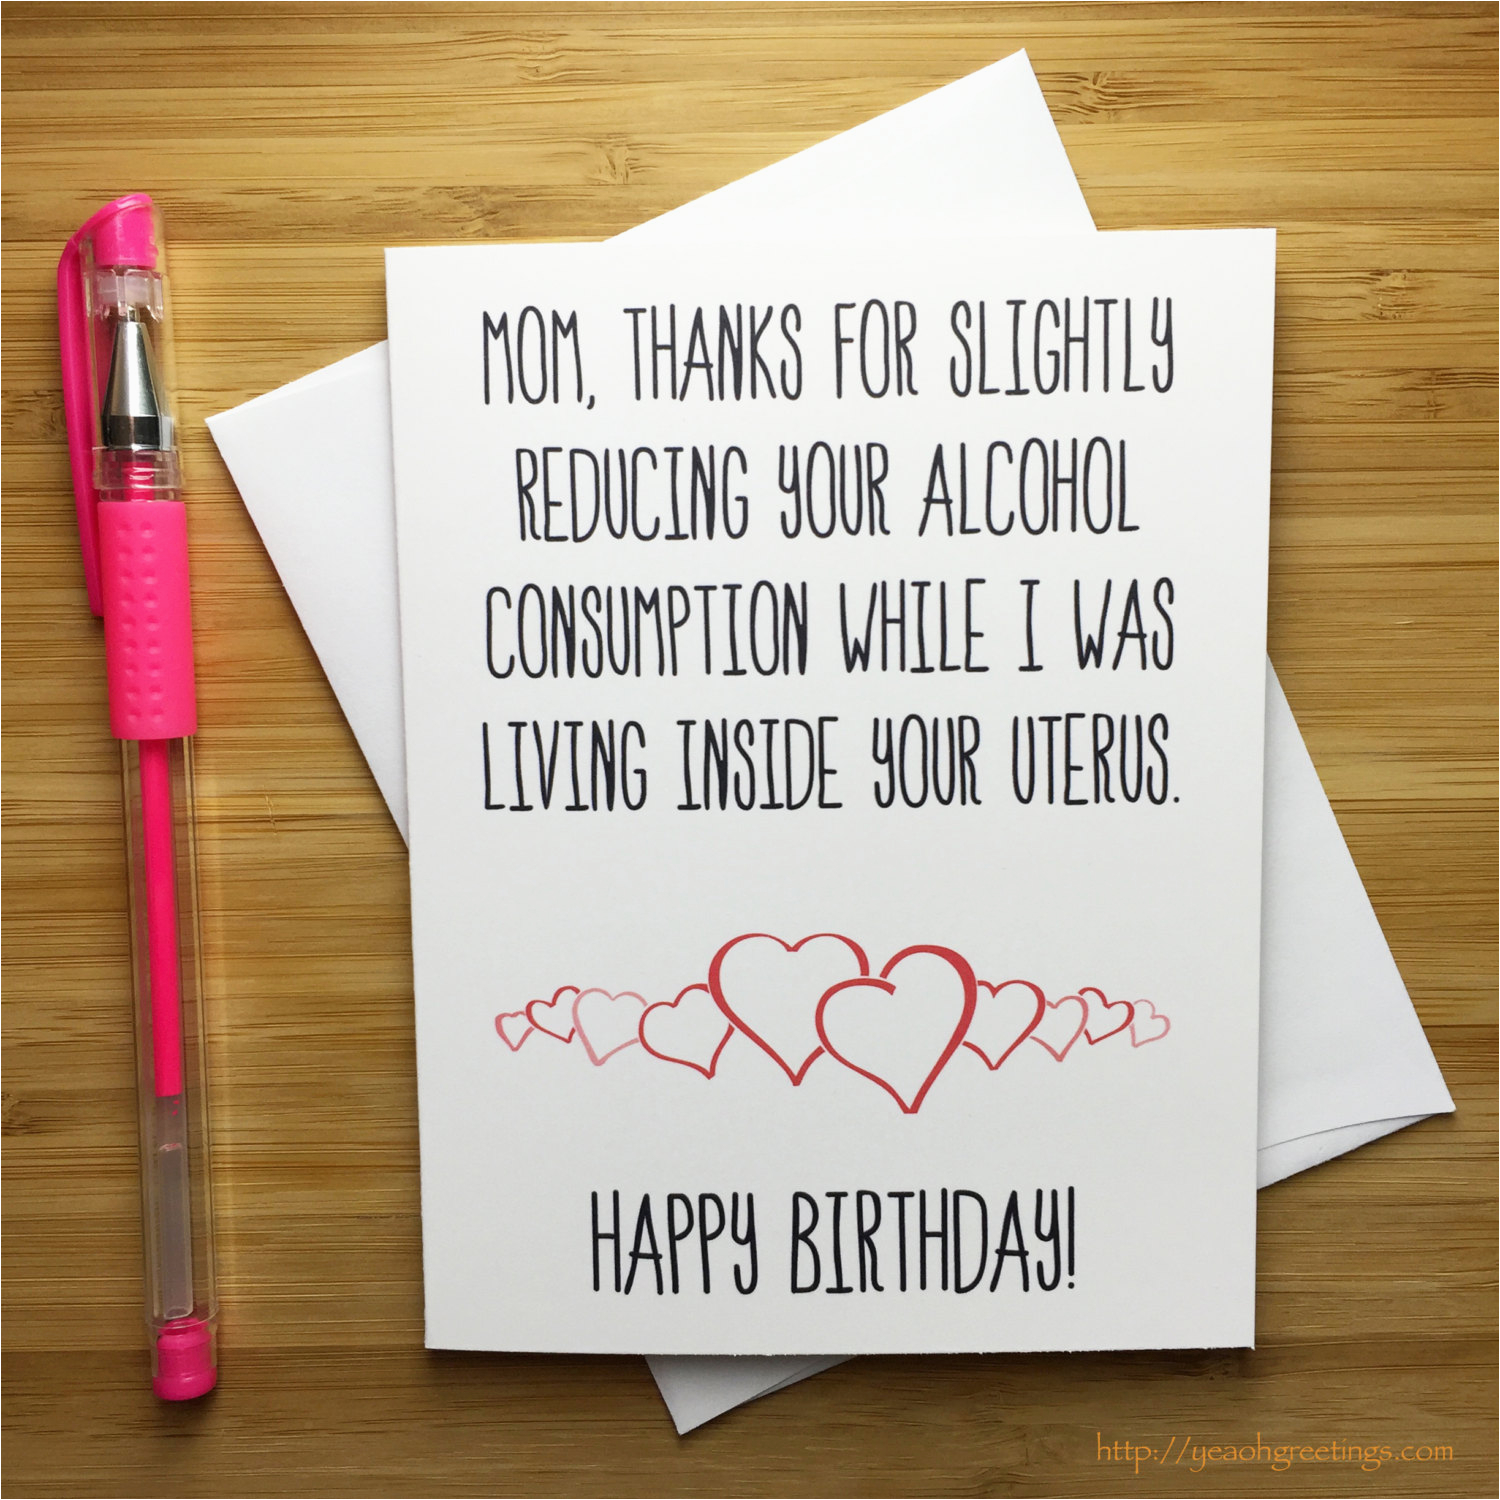 Funny Birthday Cards for Moms Mother Birthday Card Bday Card Mum Funny Birthday Card